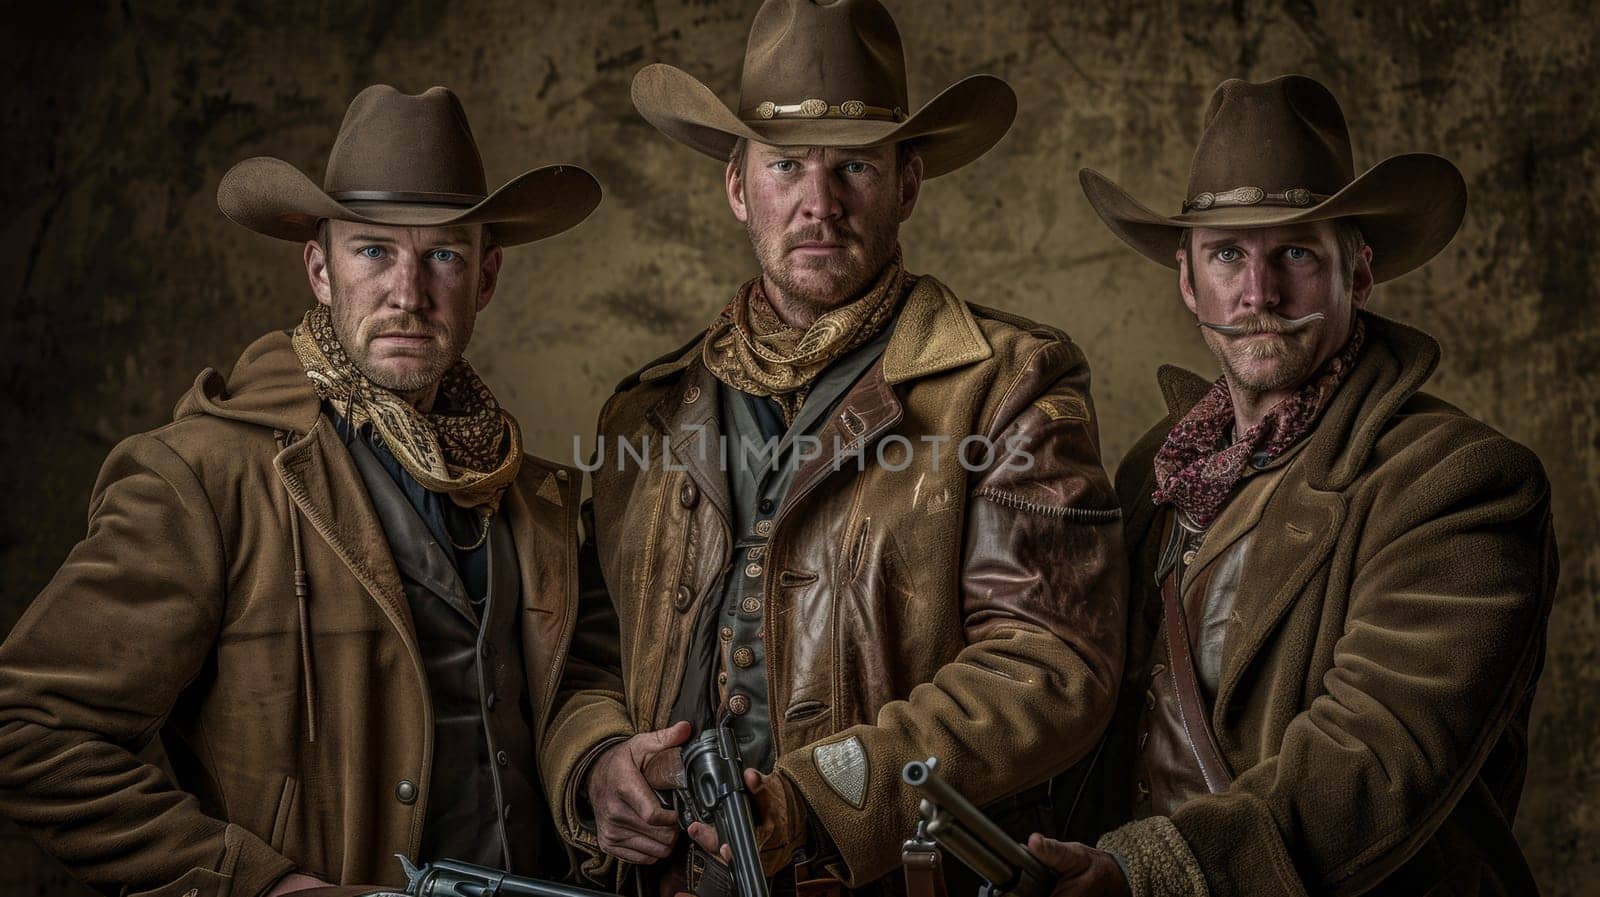 Three men in cowboy hats and suits holding guns together